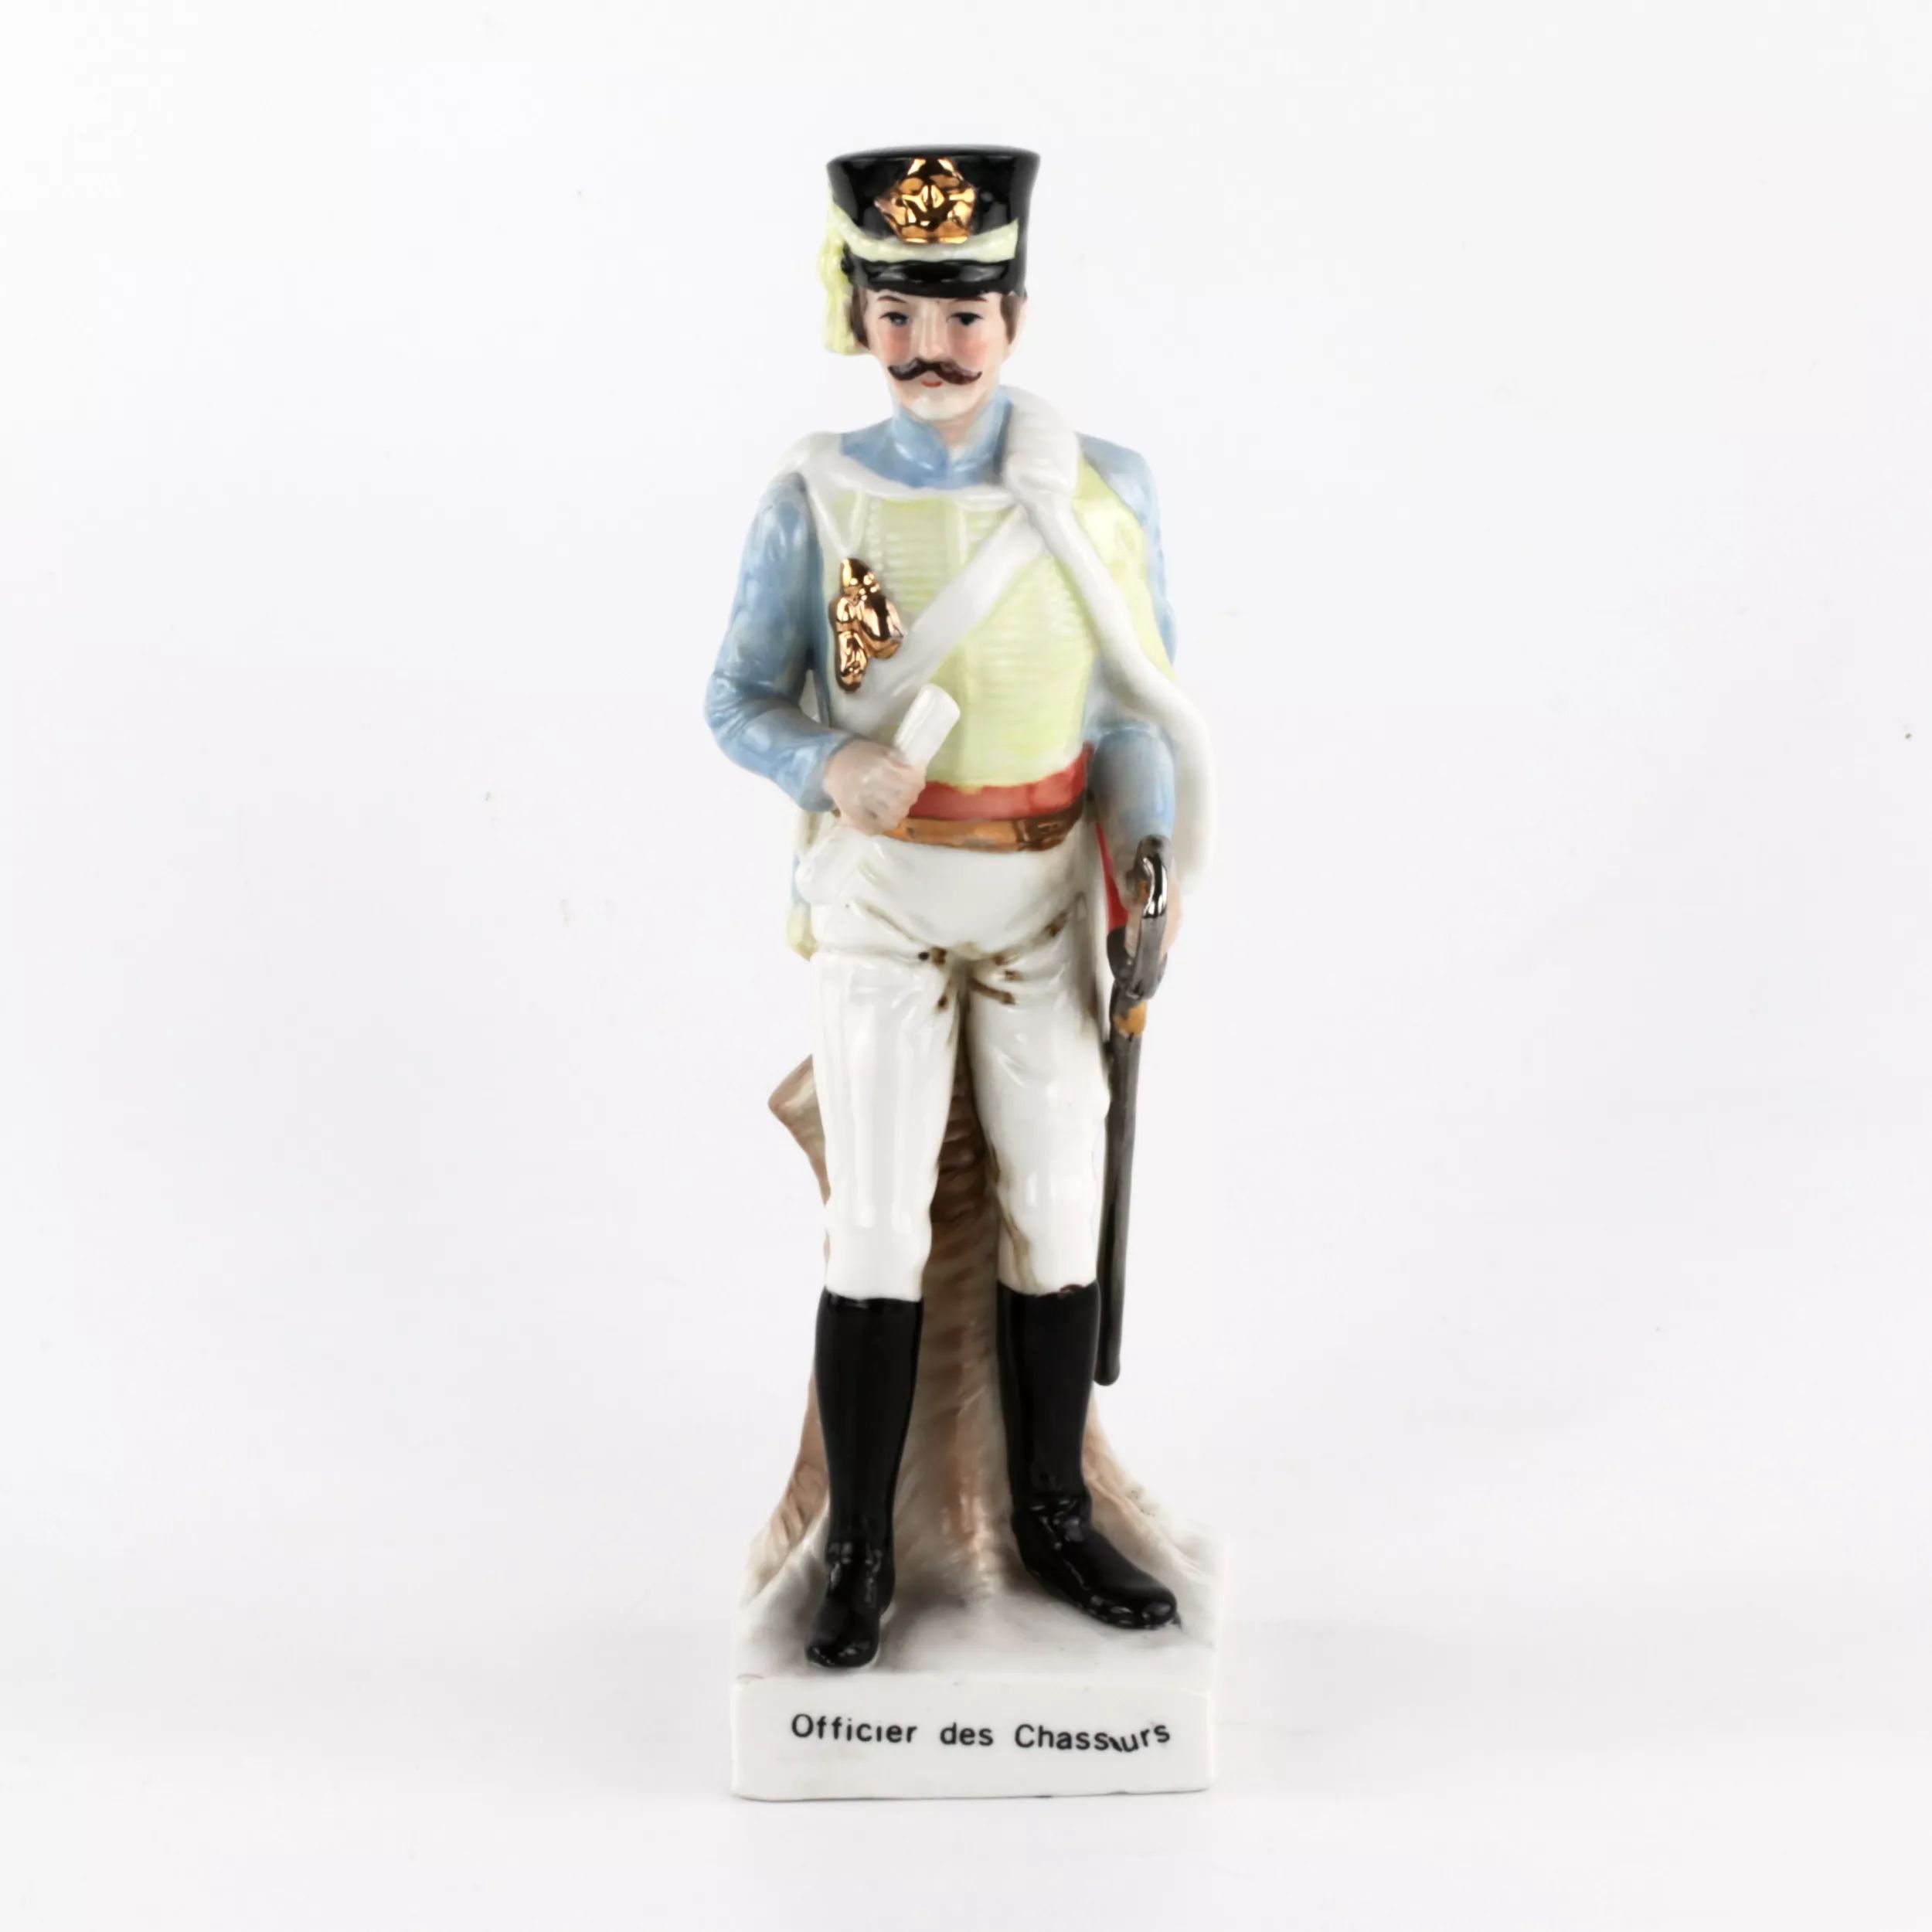 Porcelain-hussar-during-the-Napoleonic-wars-